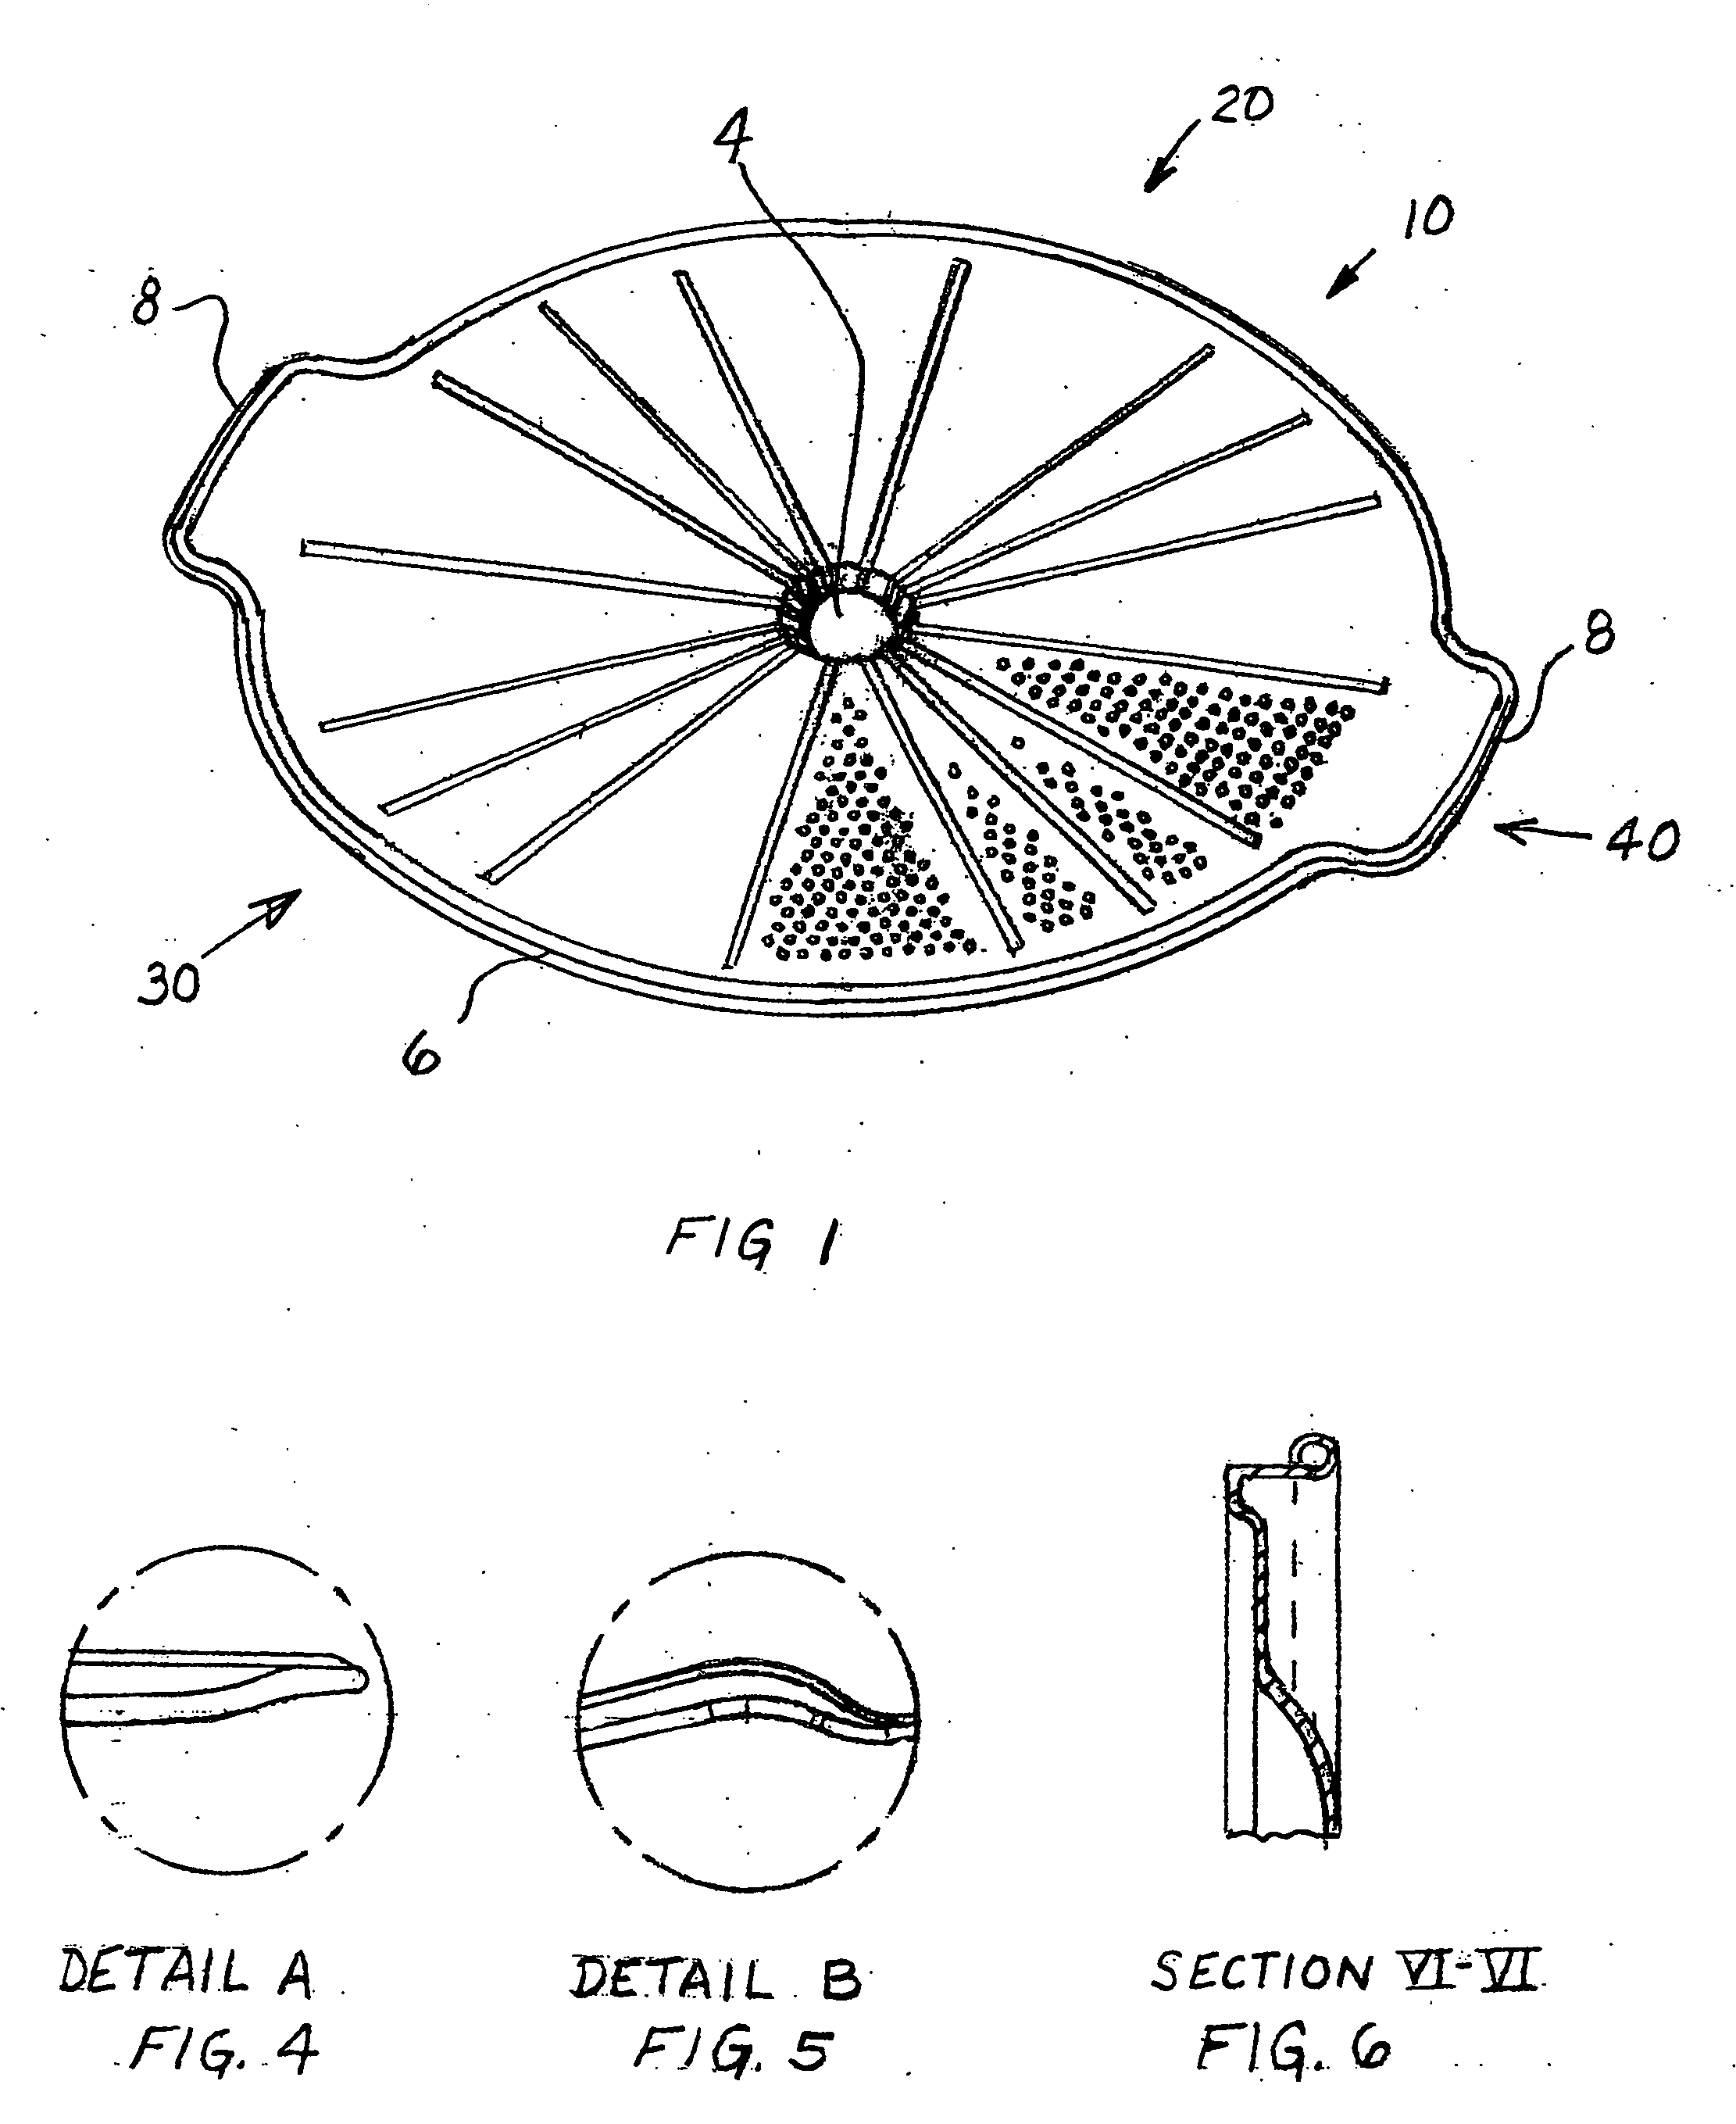 Apparatus for baking, cutting and serving